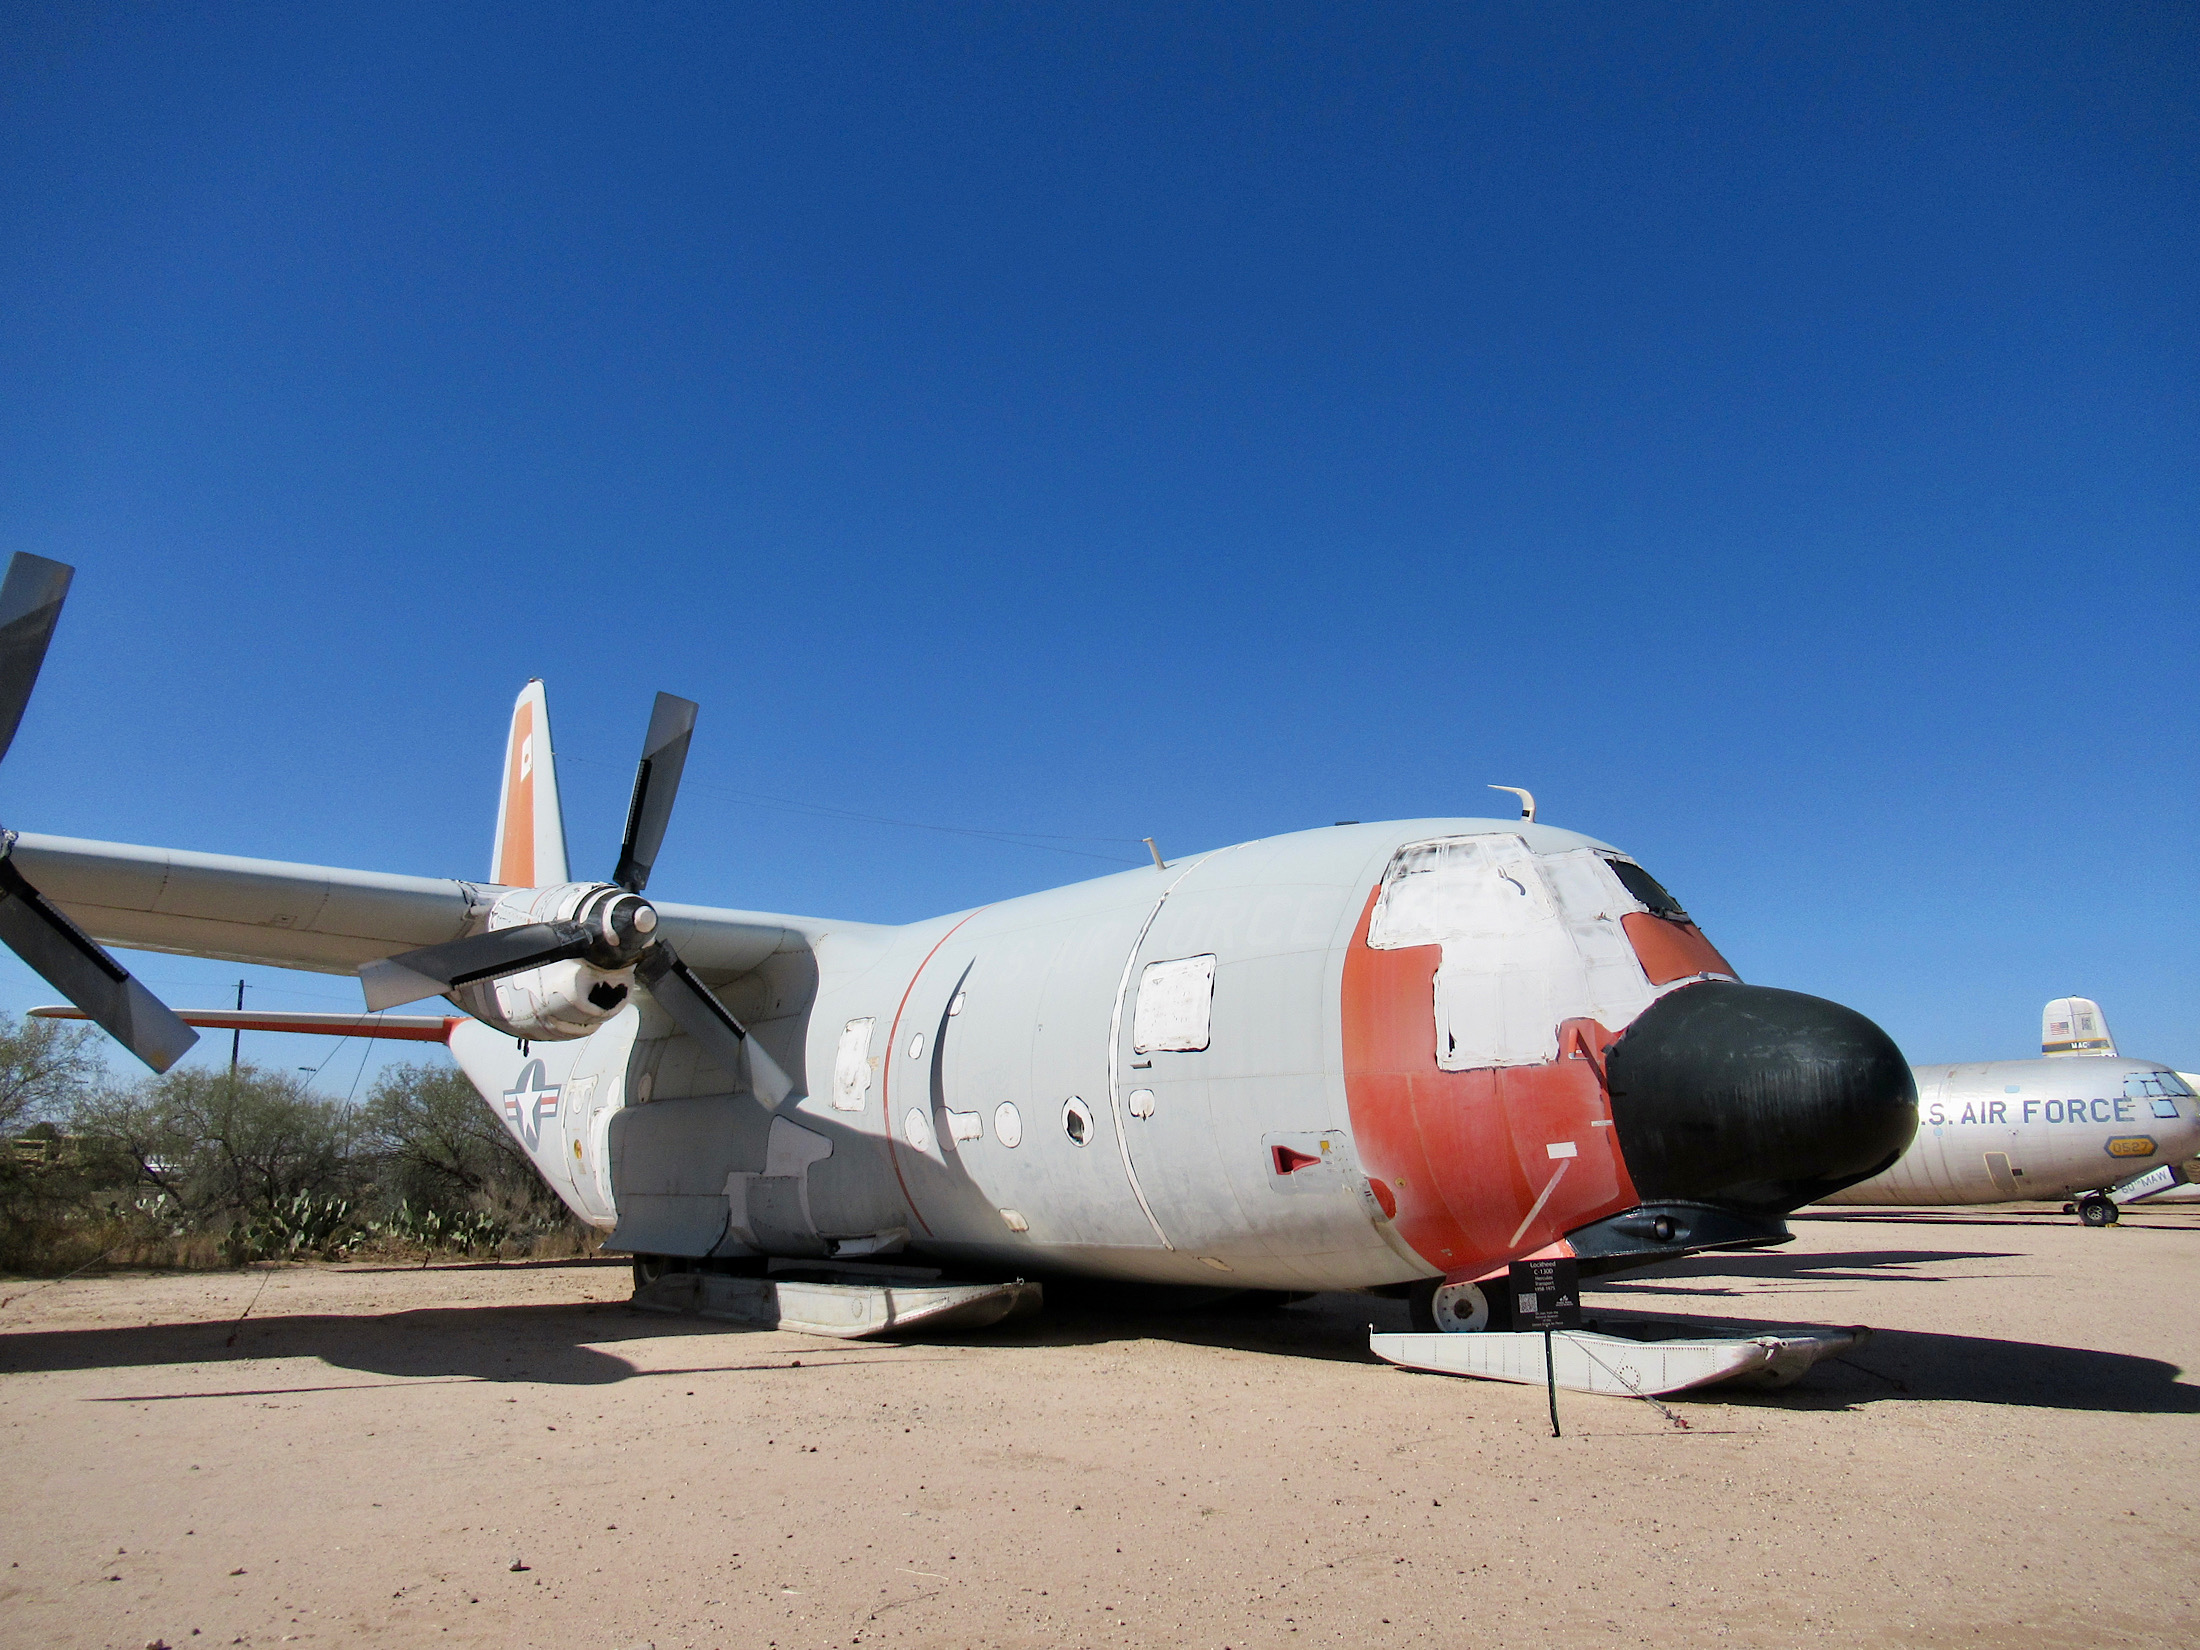 Large grey plane with skids for landing on snow or ice; painted grey with red front paint and bulbous "nose-like projection."